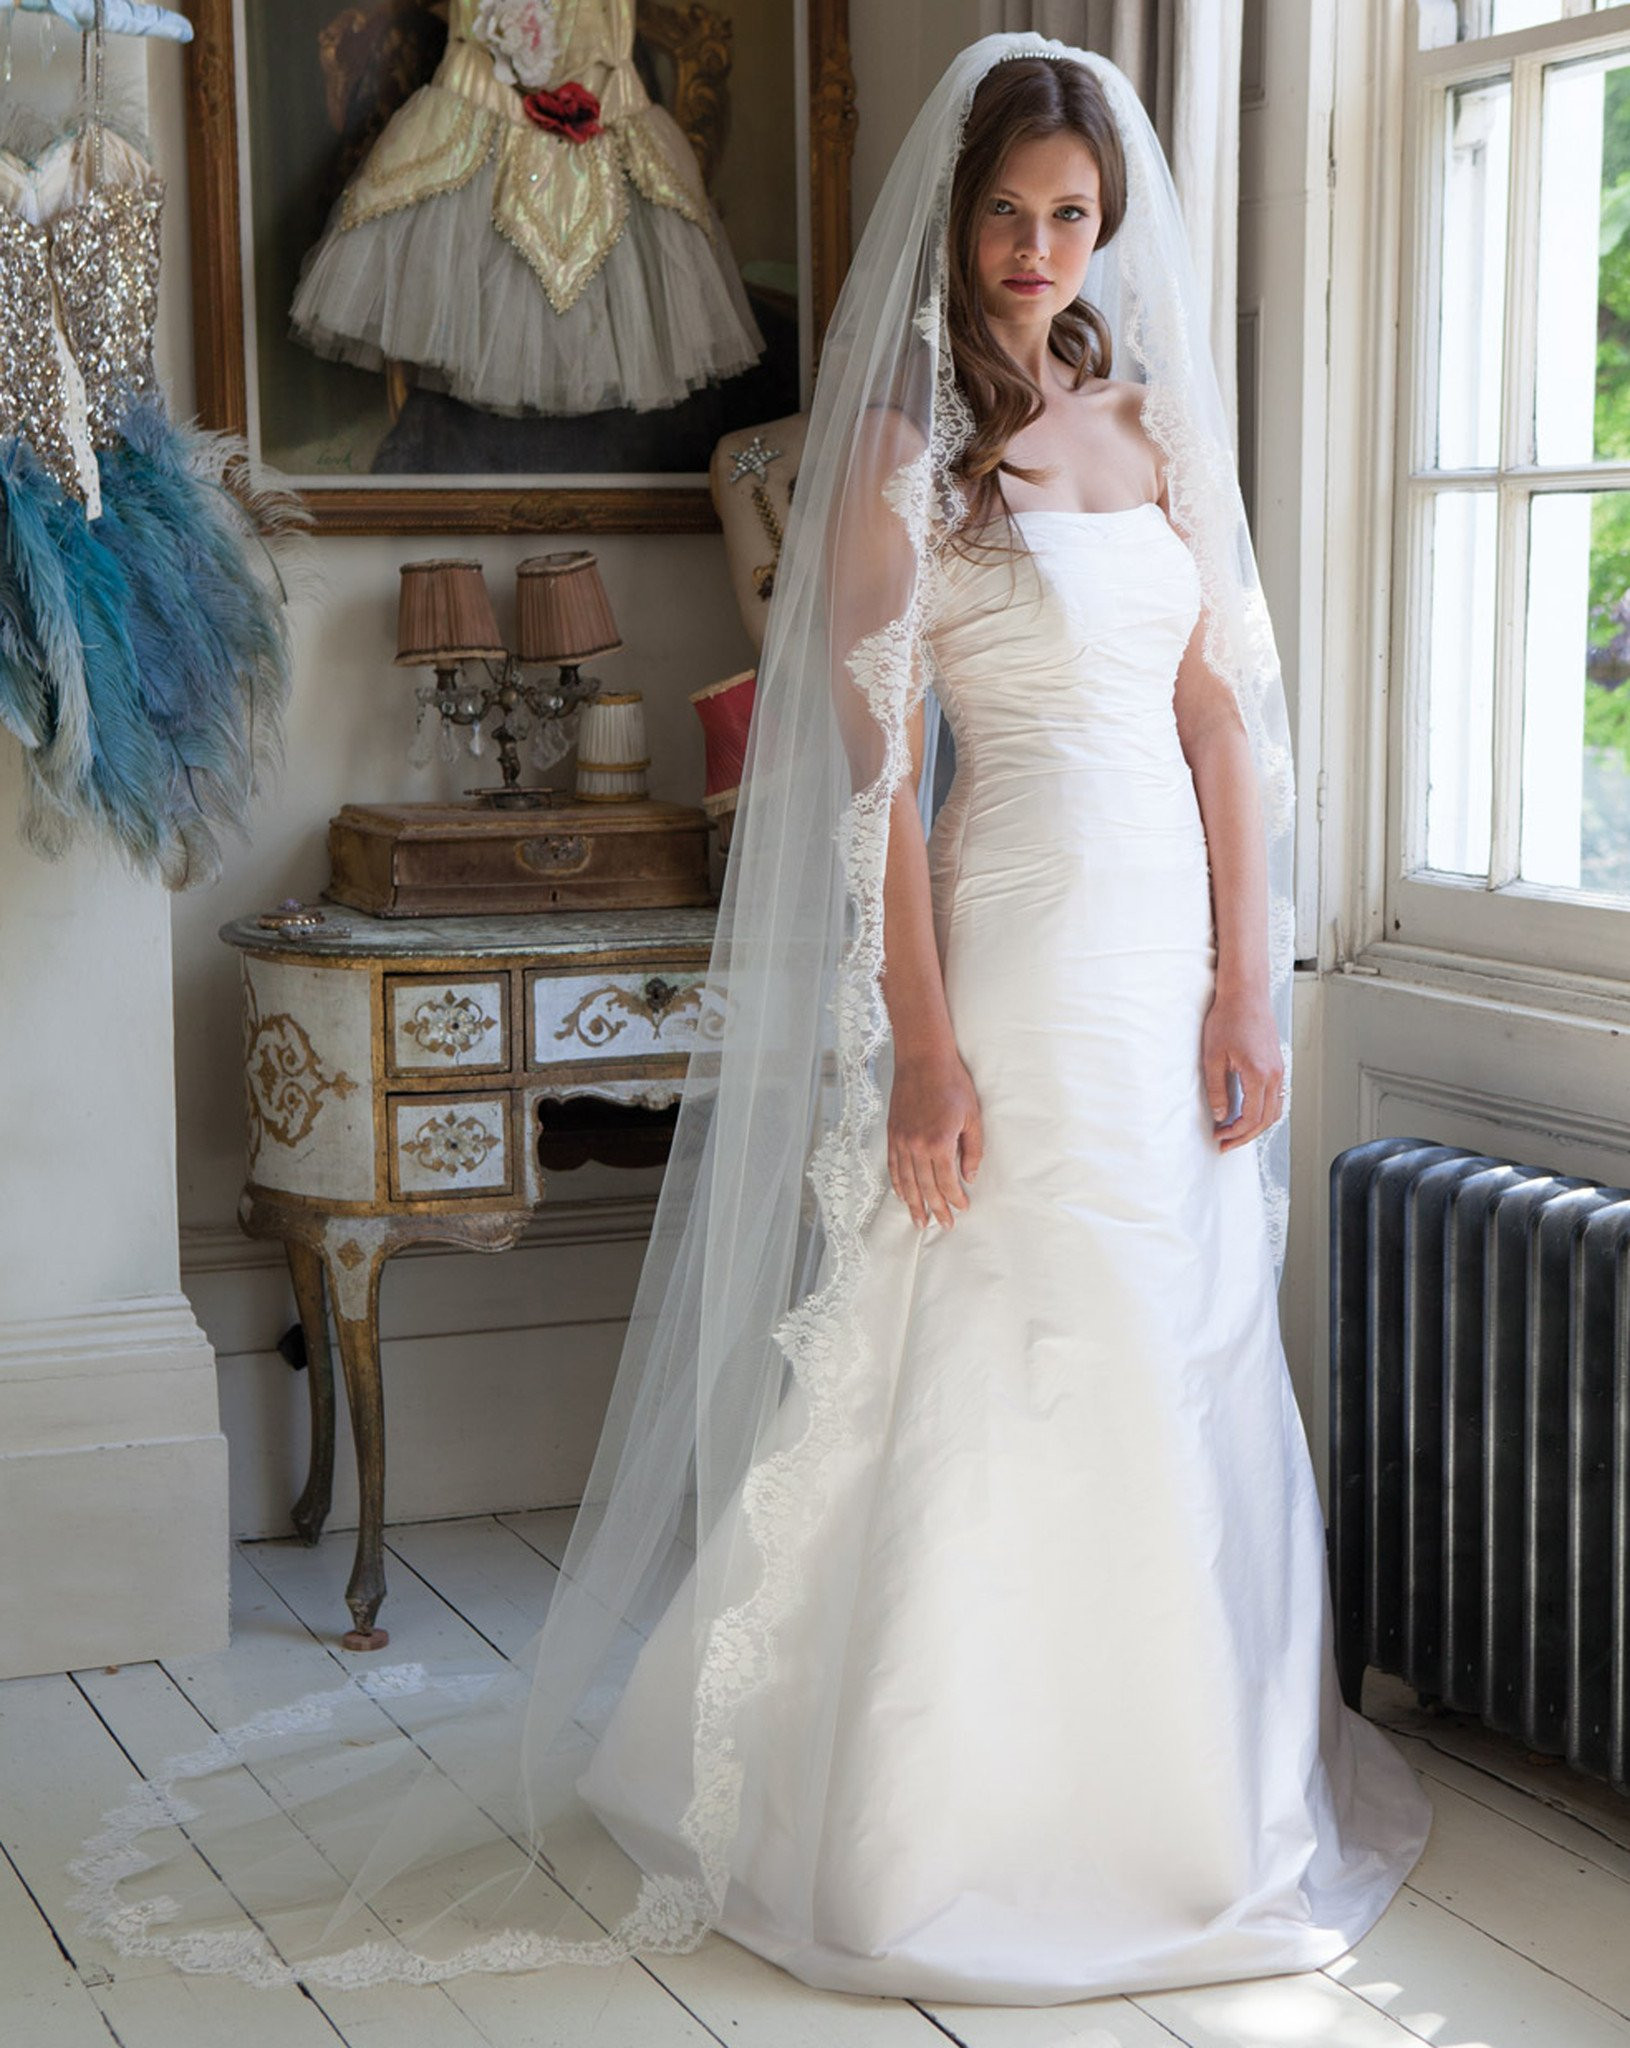 Wedding Veils With Lace Trim
 Veil train length with chantilly lace trim Spellbinder